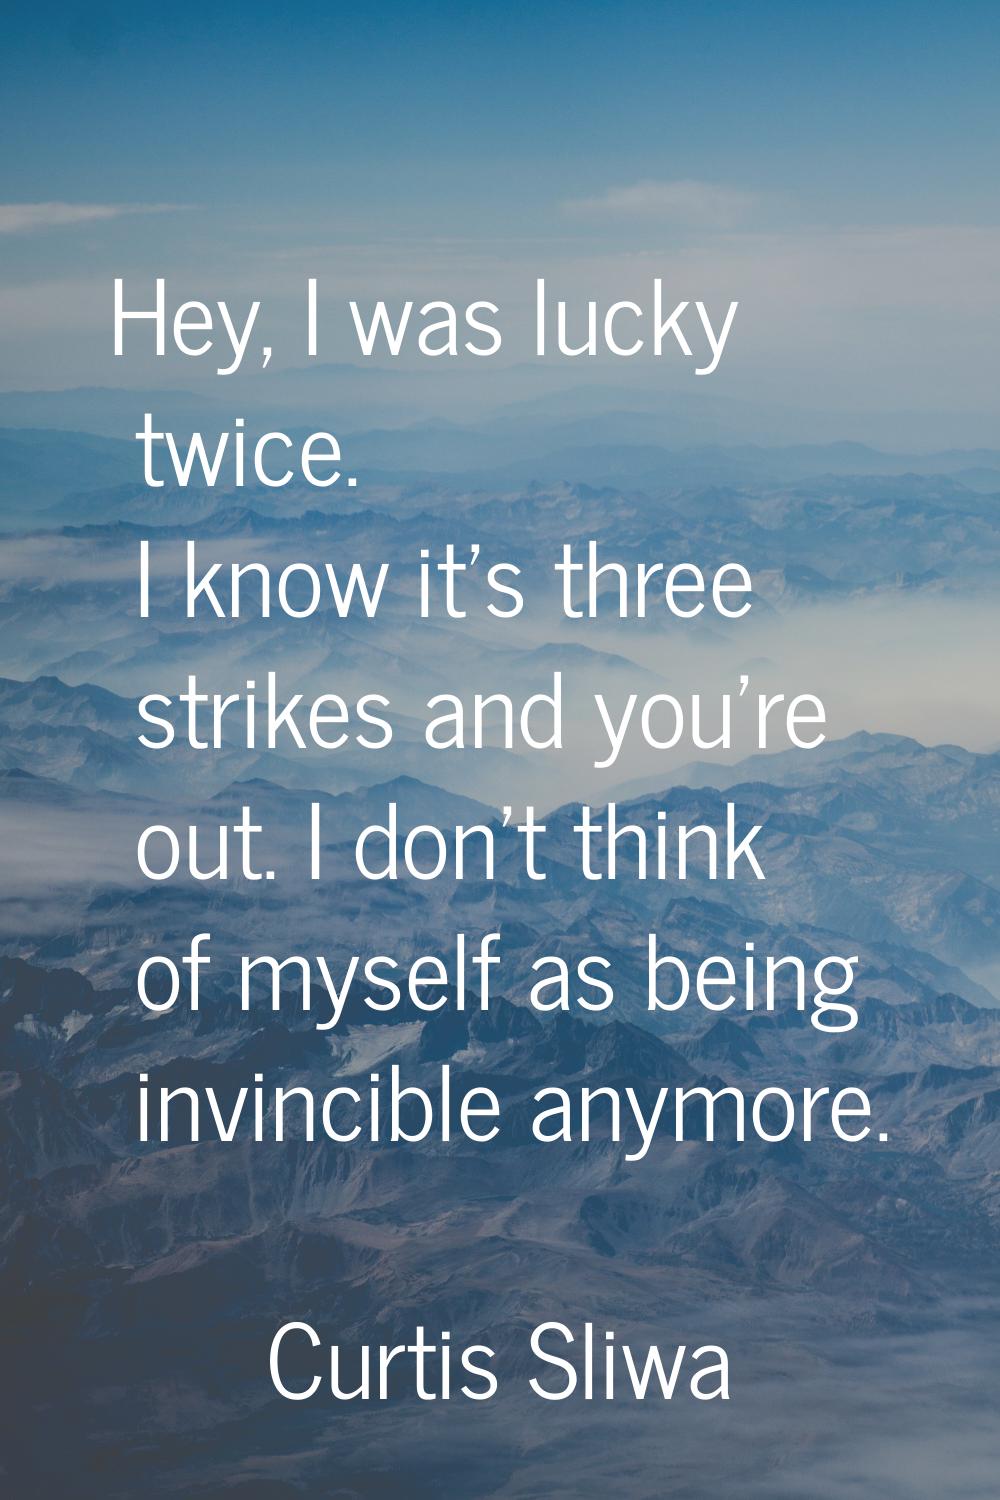 Hey, I was lucky twice. I know it's three strikes and you're out. I don't think of myself as being 